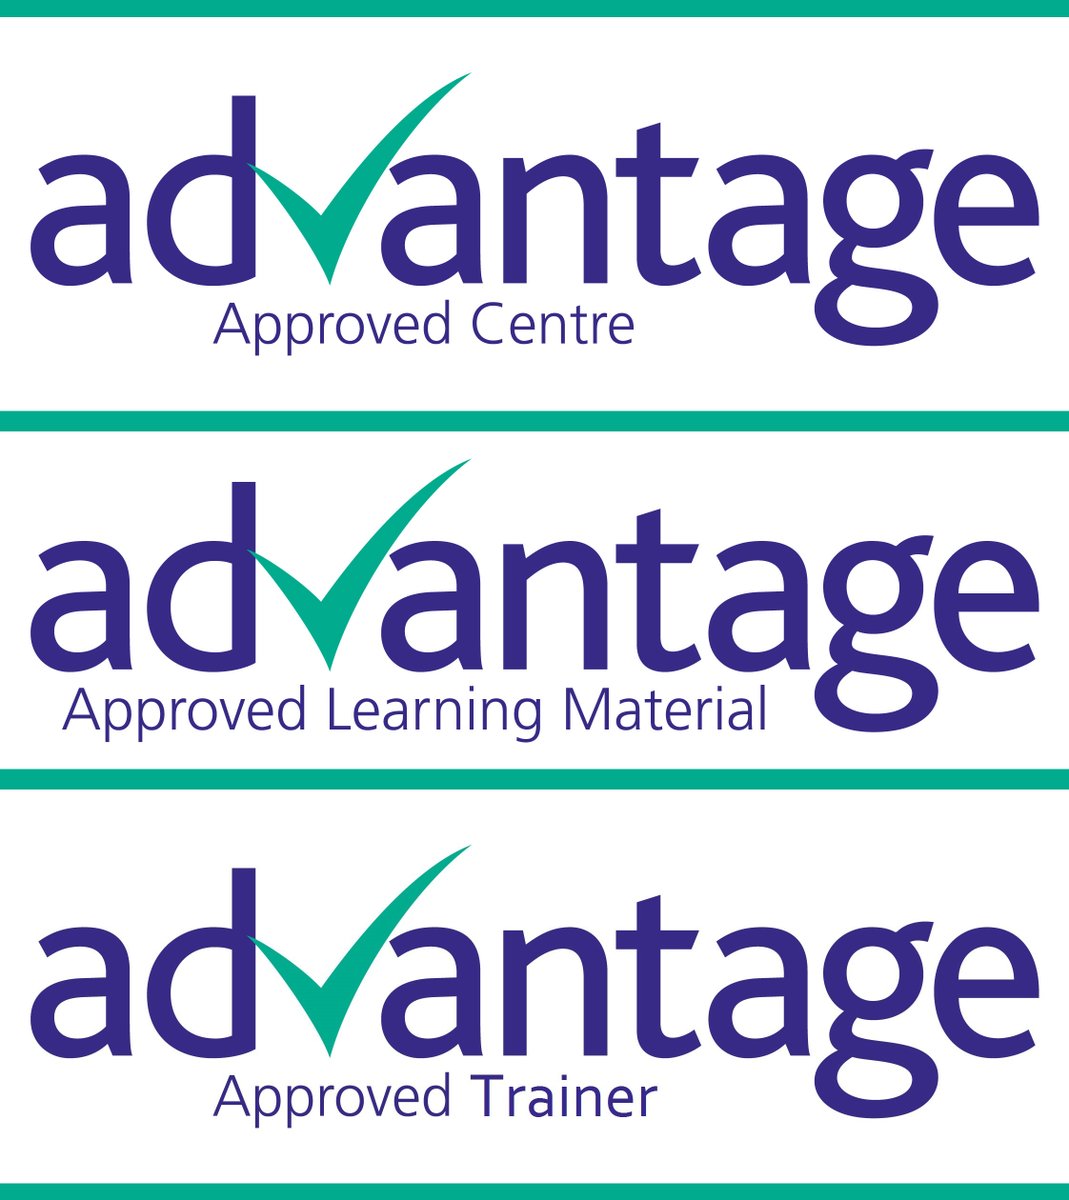 We are an Accredited Training Centre! All our courses are accredited as are all our trainers! WE ARE NOW THE ONLY DRUG AND ALCOHOL DIVERSION PROVIDER IN THE UK TO HAVE RECEIVED ACCREDITATION SPECIFICALLY FOR OUR EDUCATION AND TRAINING INTERVENTIONS! @AdvantageAcc